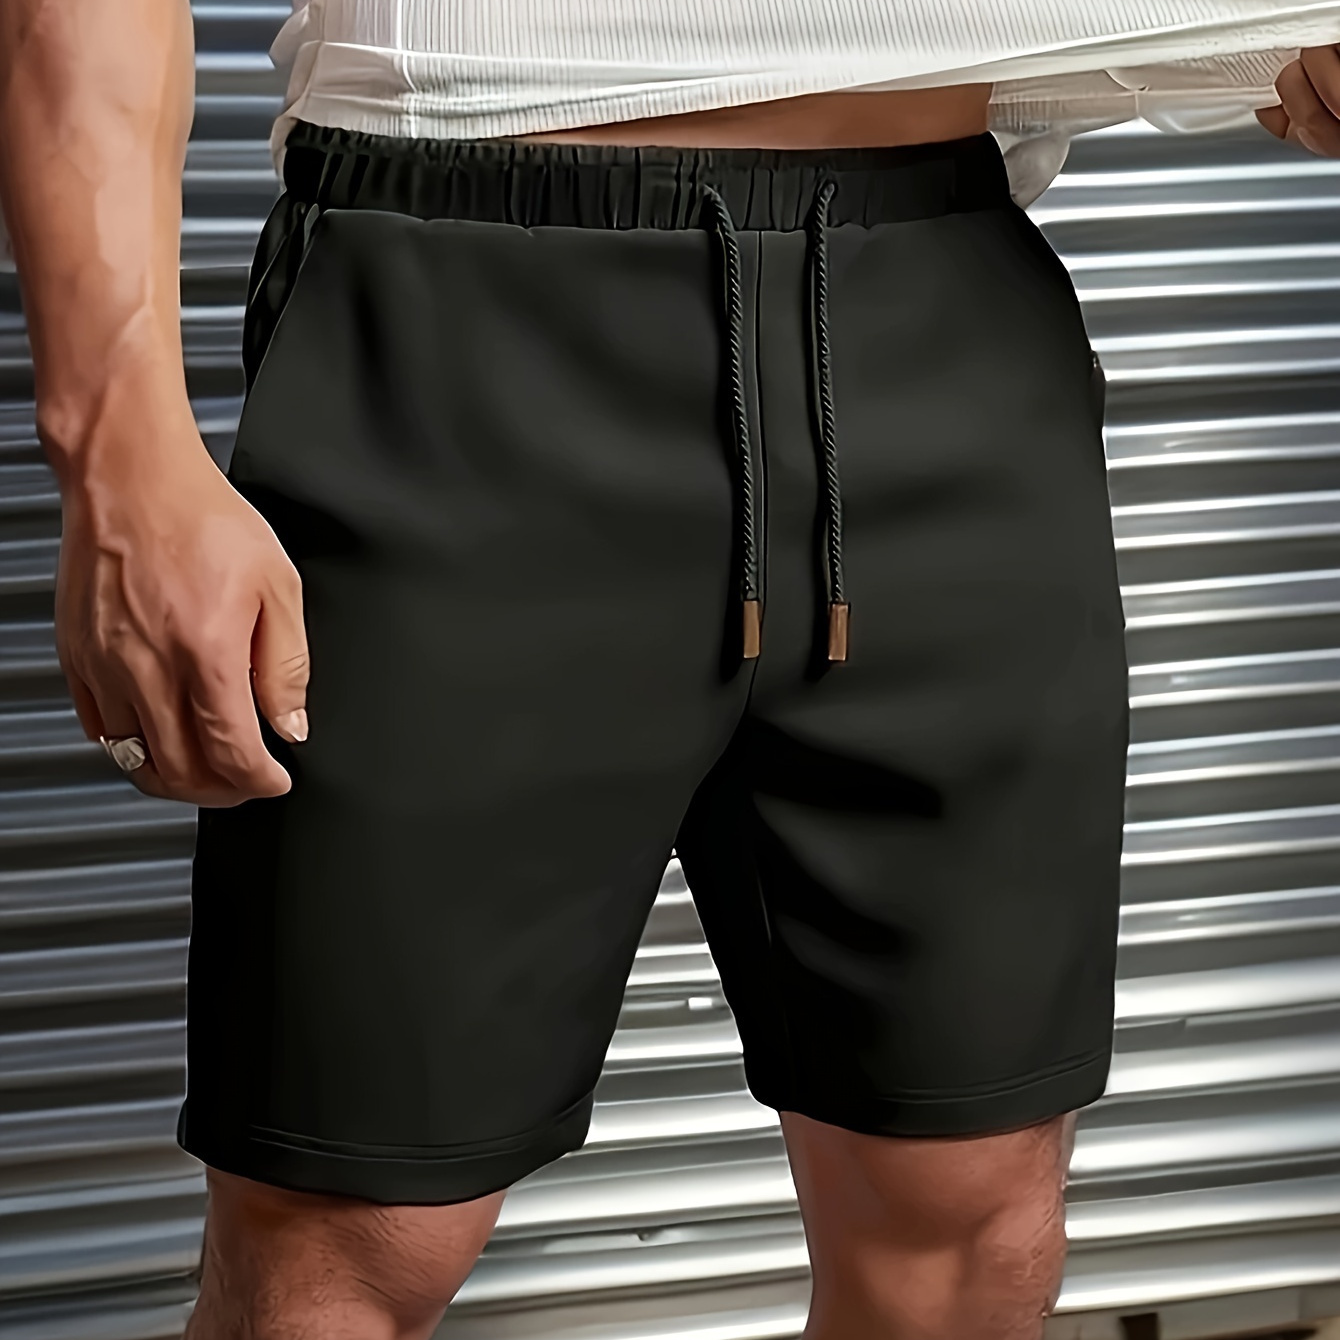 

Men's Casual And Chic Regular Fit Shorts With Drawstring And Pockets For Summer Outdoors And Workout Wear